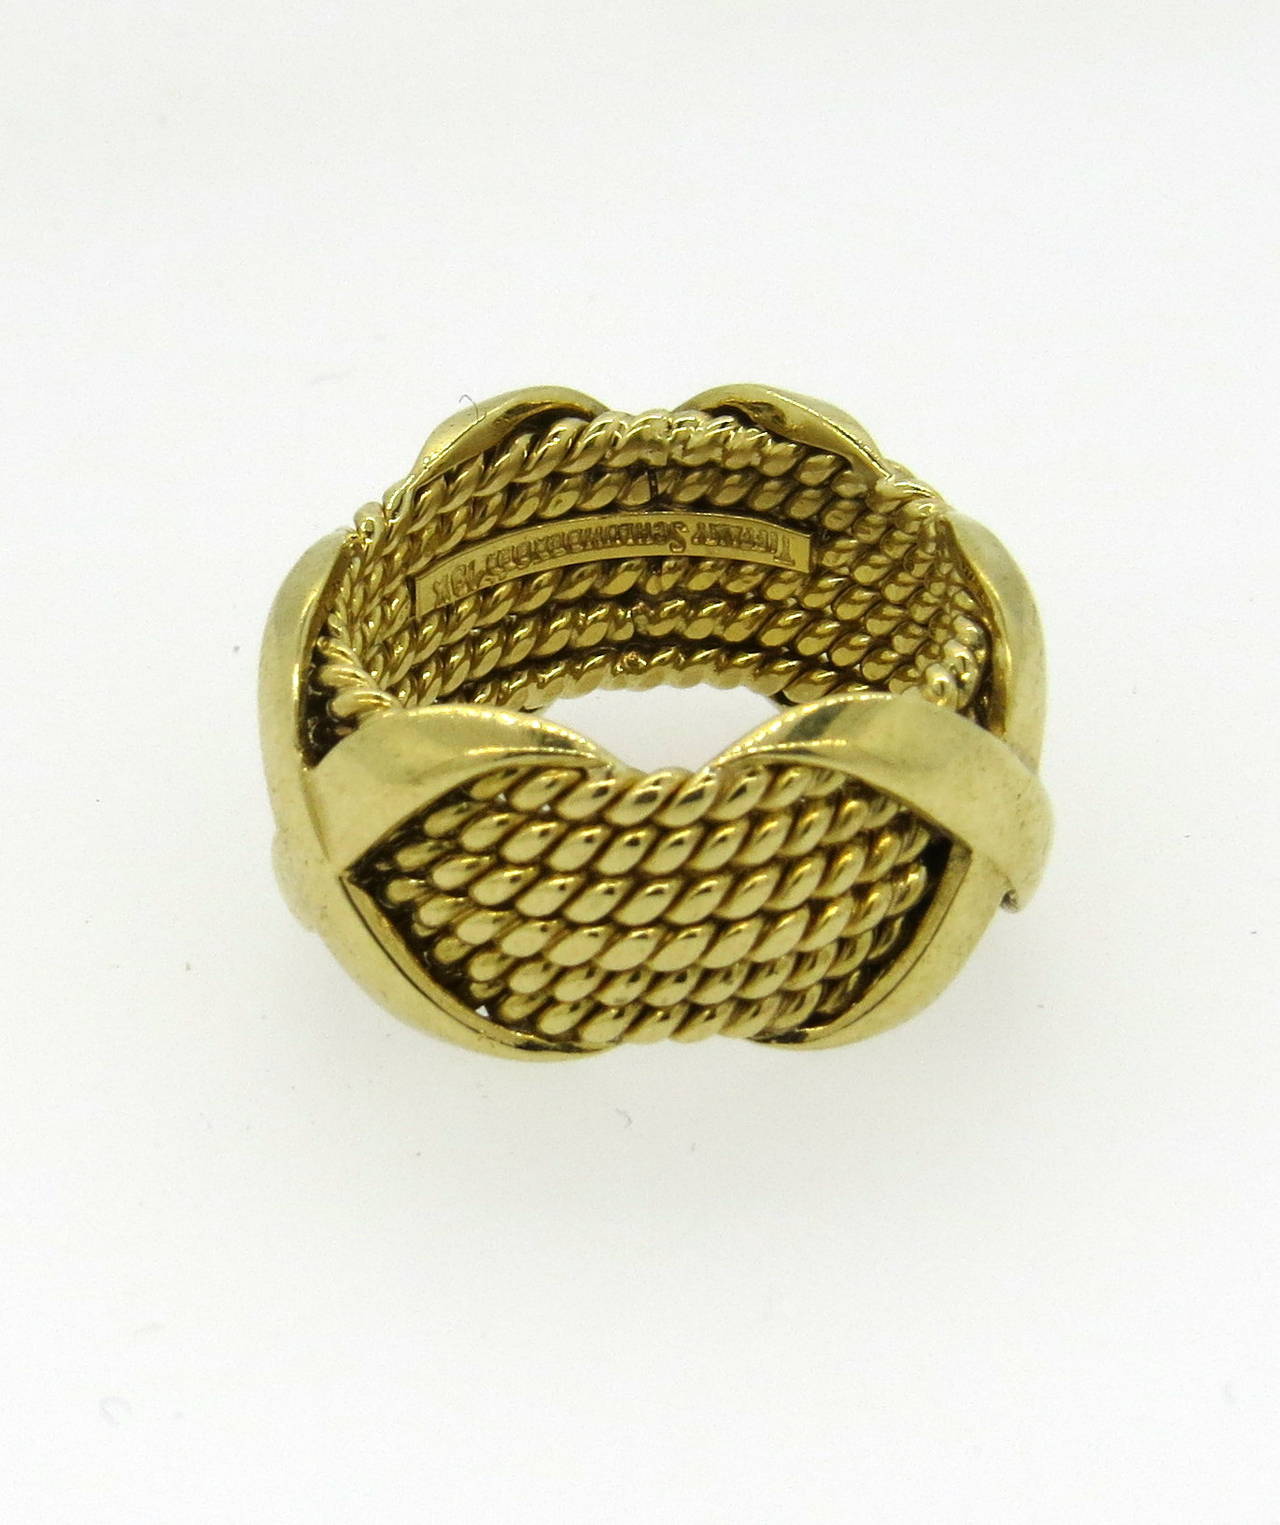 18k gold band ring, designed by Jean Schlumberger for Tiffany & Co ,from Rope collection. Ring is a size 5 1/2 and is 11.3mm wide. Marked Tiffany & Co, Shclumberger 18k. Weight  of the piece - 11.9 grams